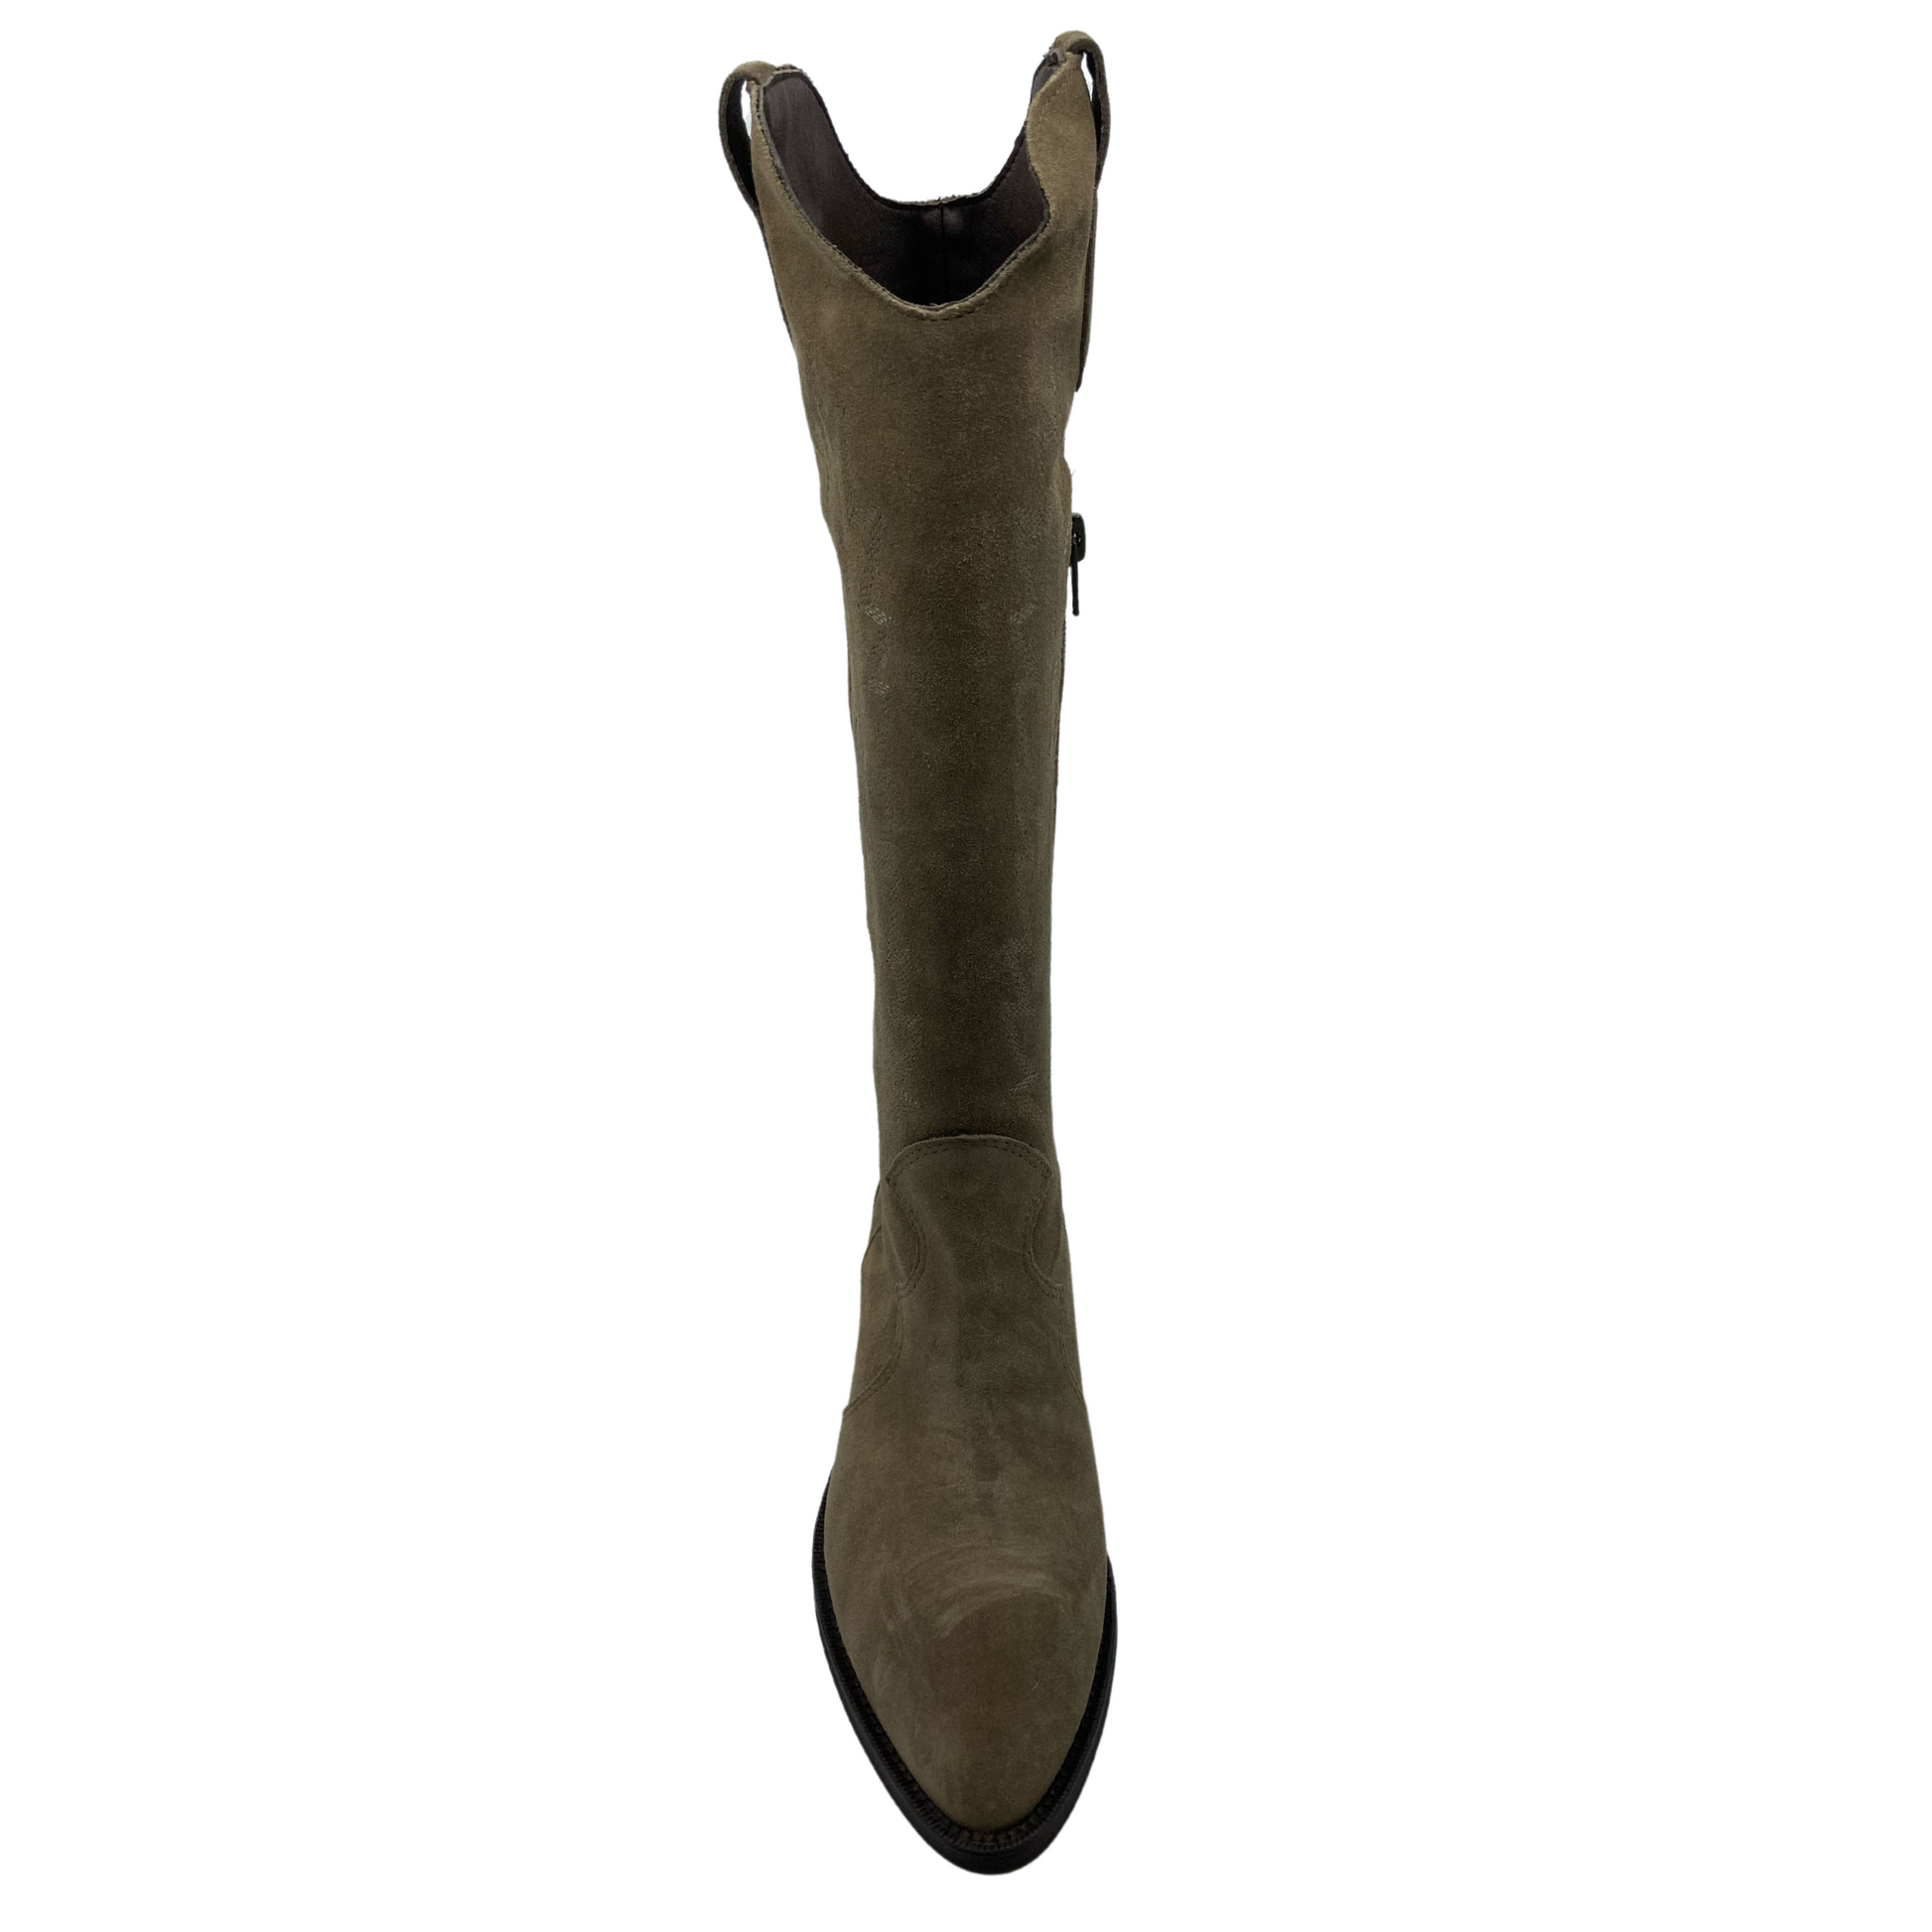 Front view of tall sand coloured cowboy boot with pointed toe and side zipper closure